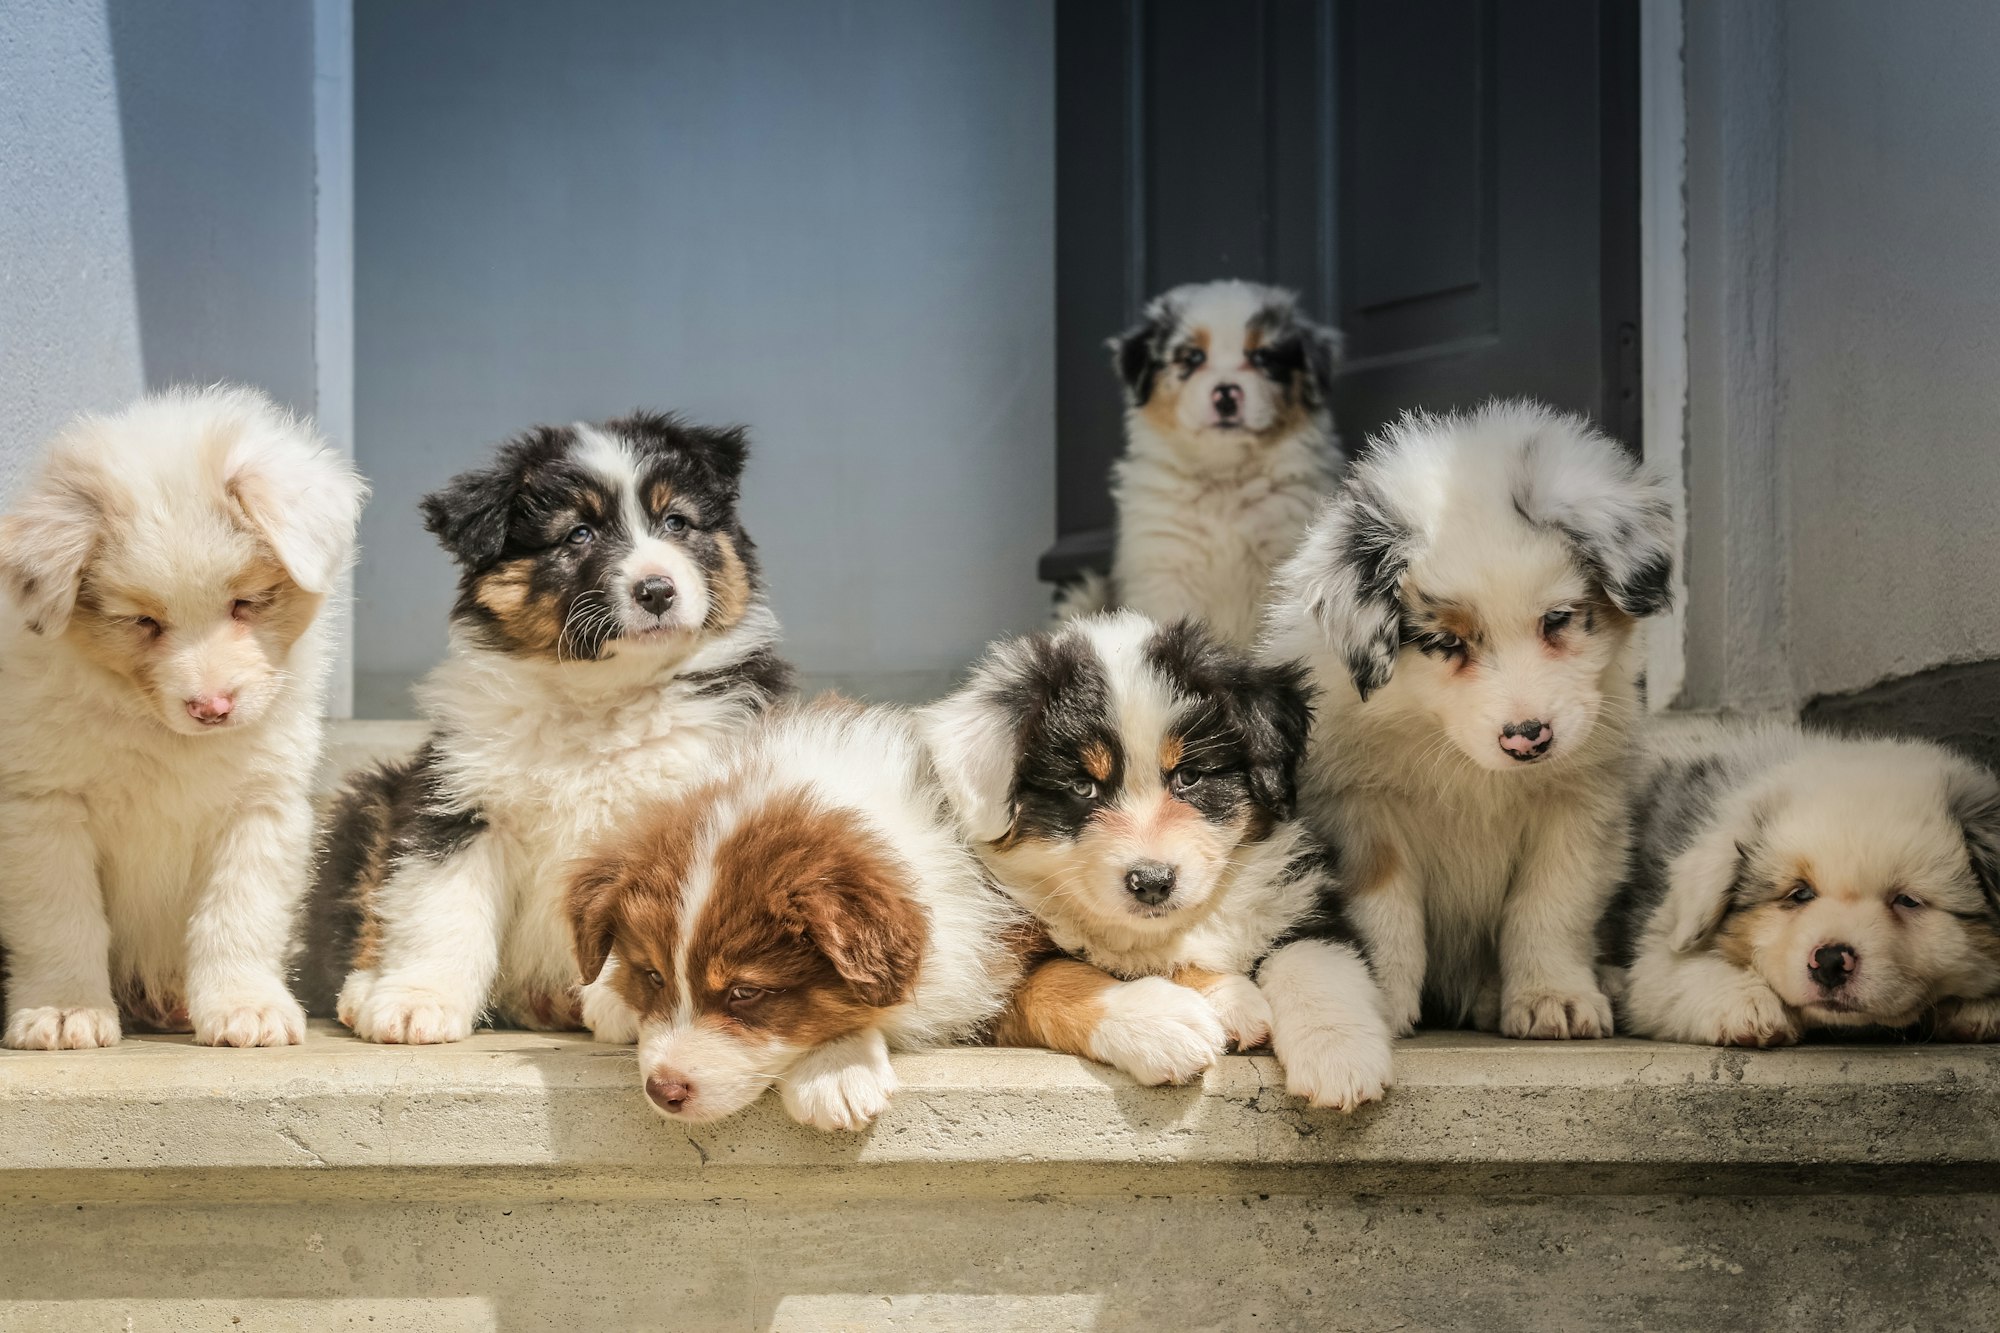 More photos and videos of Australian Shepherd babies on our facebook page “bbbergeraustralien”